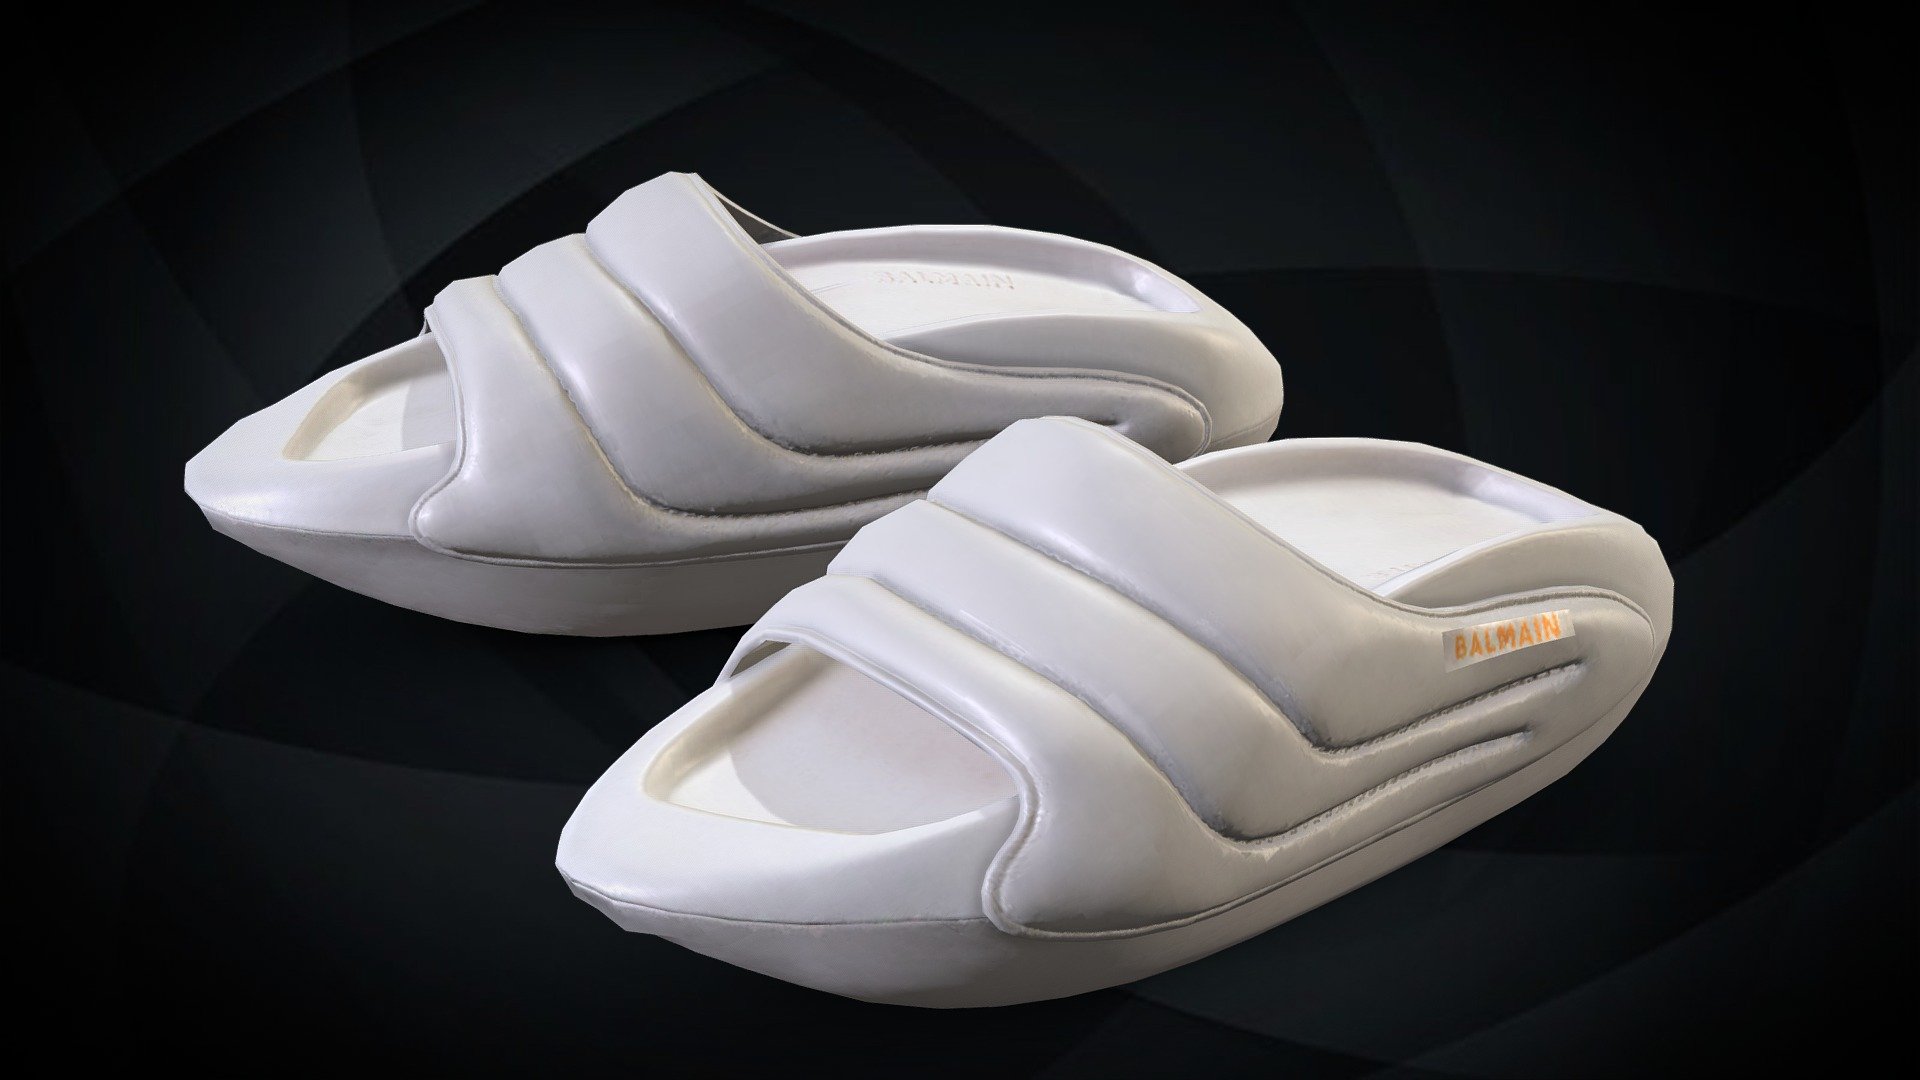 Lowpoly Gameassets PBR BALMAIN white leather fashion summer slipper

A Very Detailed scanned shoes with High-Quality .Reay to use in virtual try on project and game sim 4 or second life.

This Mesh is UV unwrapped non-overlapped.

1024x1024 difuse Normal Gloss Texture Map jpg format，in the compressed file rar.

File contains :

FBX .OBJ.DAE.MAYA and PBR Texture(tga format).

If you want to change the colorway of the shoes, it is easy to do it with photopshop. If you want to change the colorway or decrease the polycourt ,I am willing to do it.

This is a professional scanning agency, if you want any other shoes, Don’t hesitate to tell me.It will helps a lot.we are available for custom shoes scan.

Don’t forget to check my other sneakers,Have a nice day：） - BALMAIN white leather fashion summer slipper - Buy Royalty Free 3D model by Vincent Page (@vincentpage) 3d model